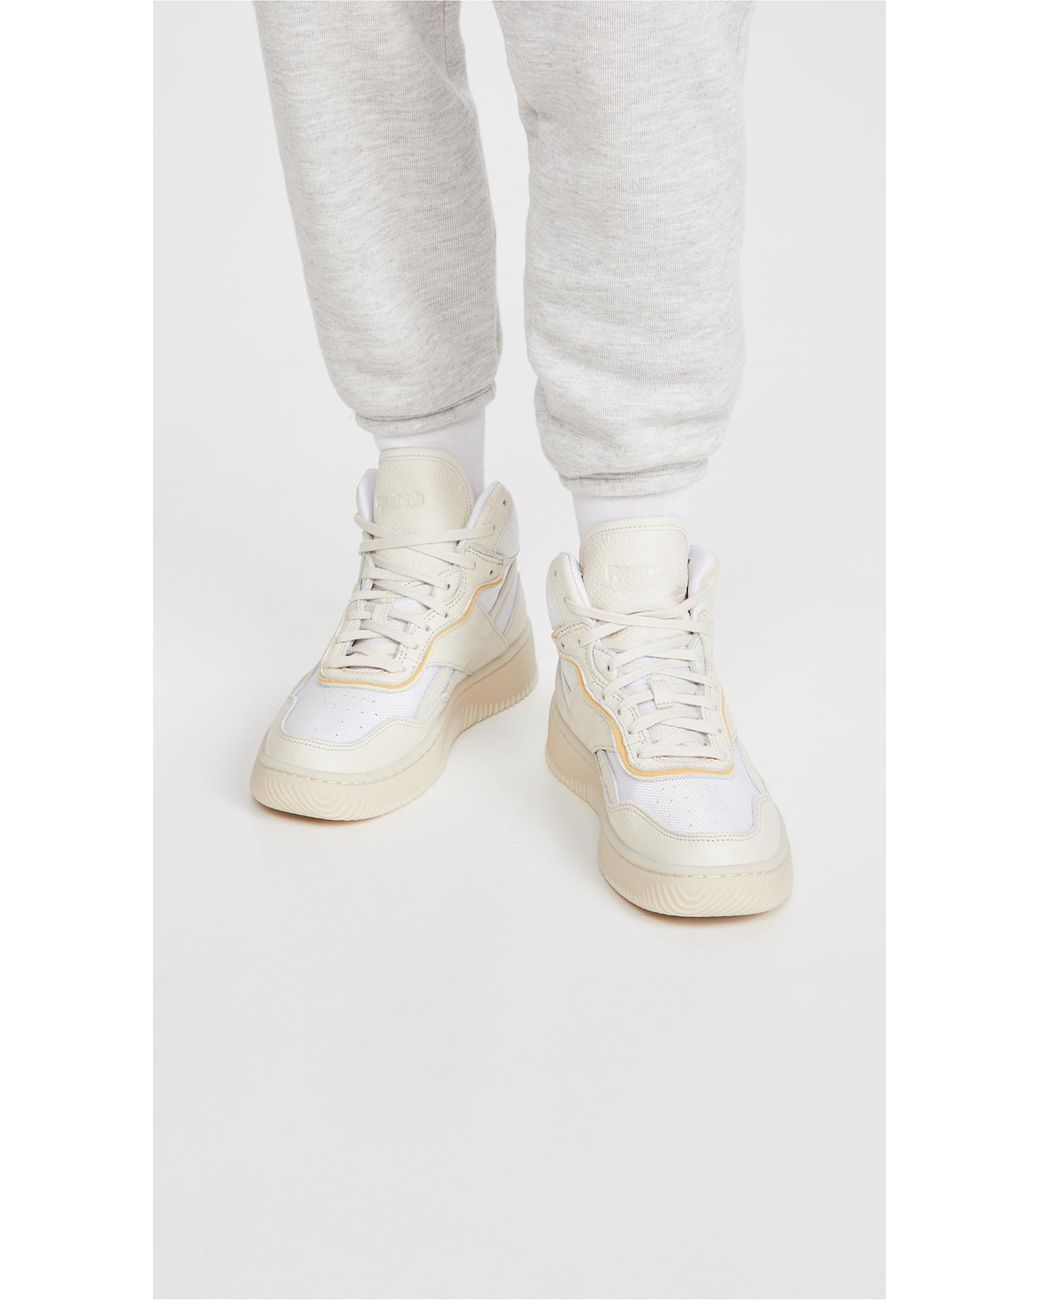 Reebok X Victoria Beckham Leather Dual Court Mid Ii Vb Sneakers in White |  Lyst